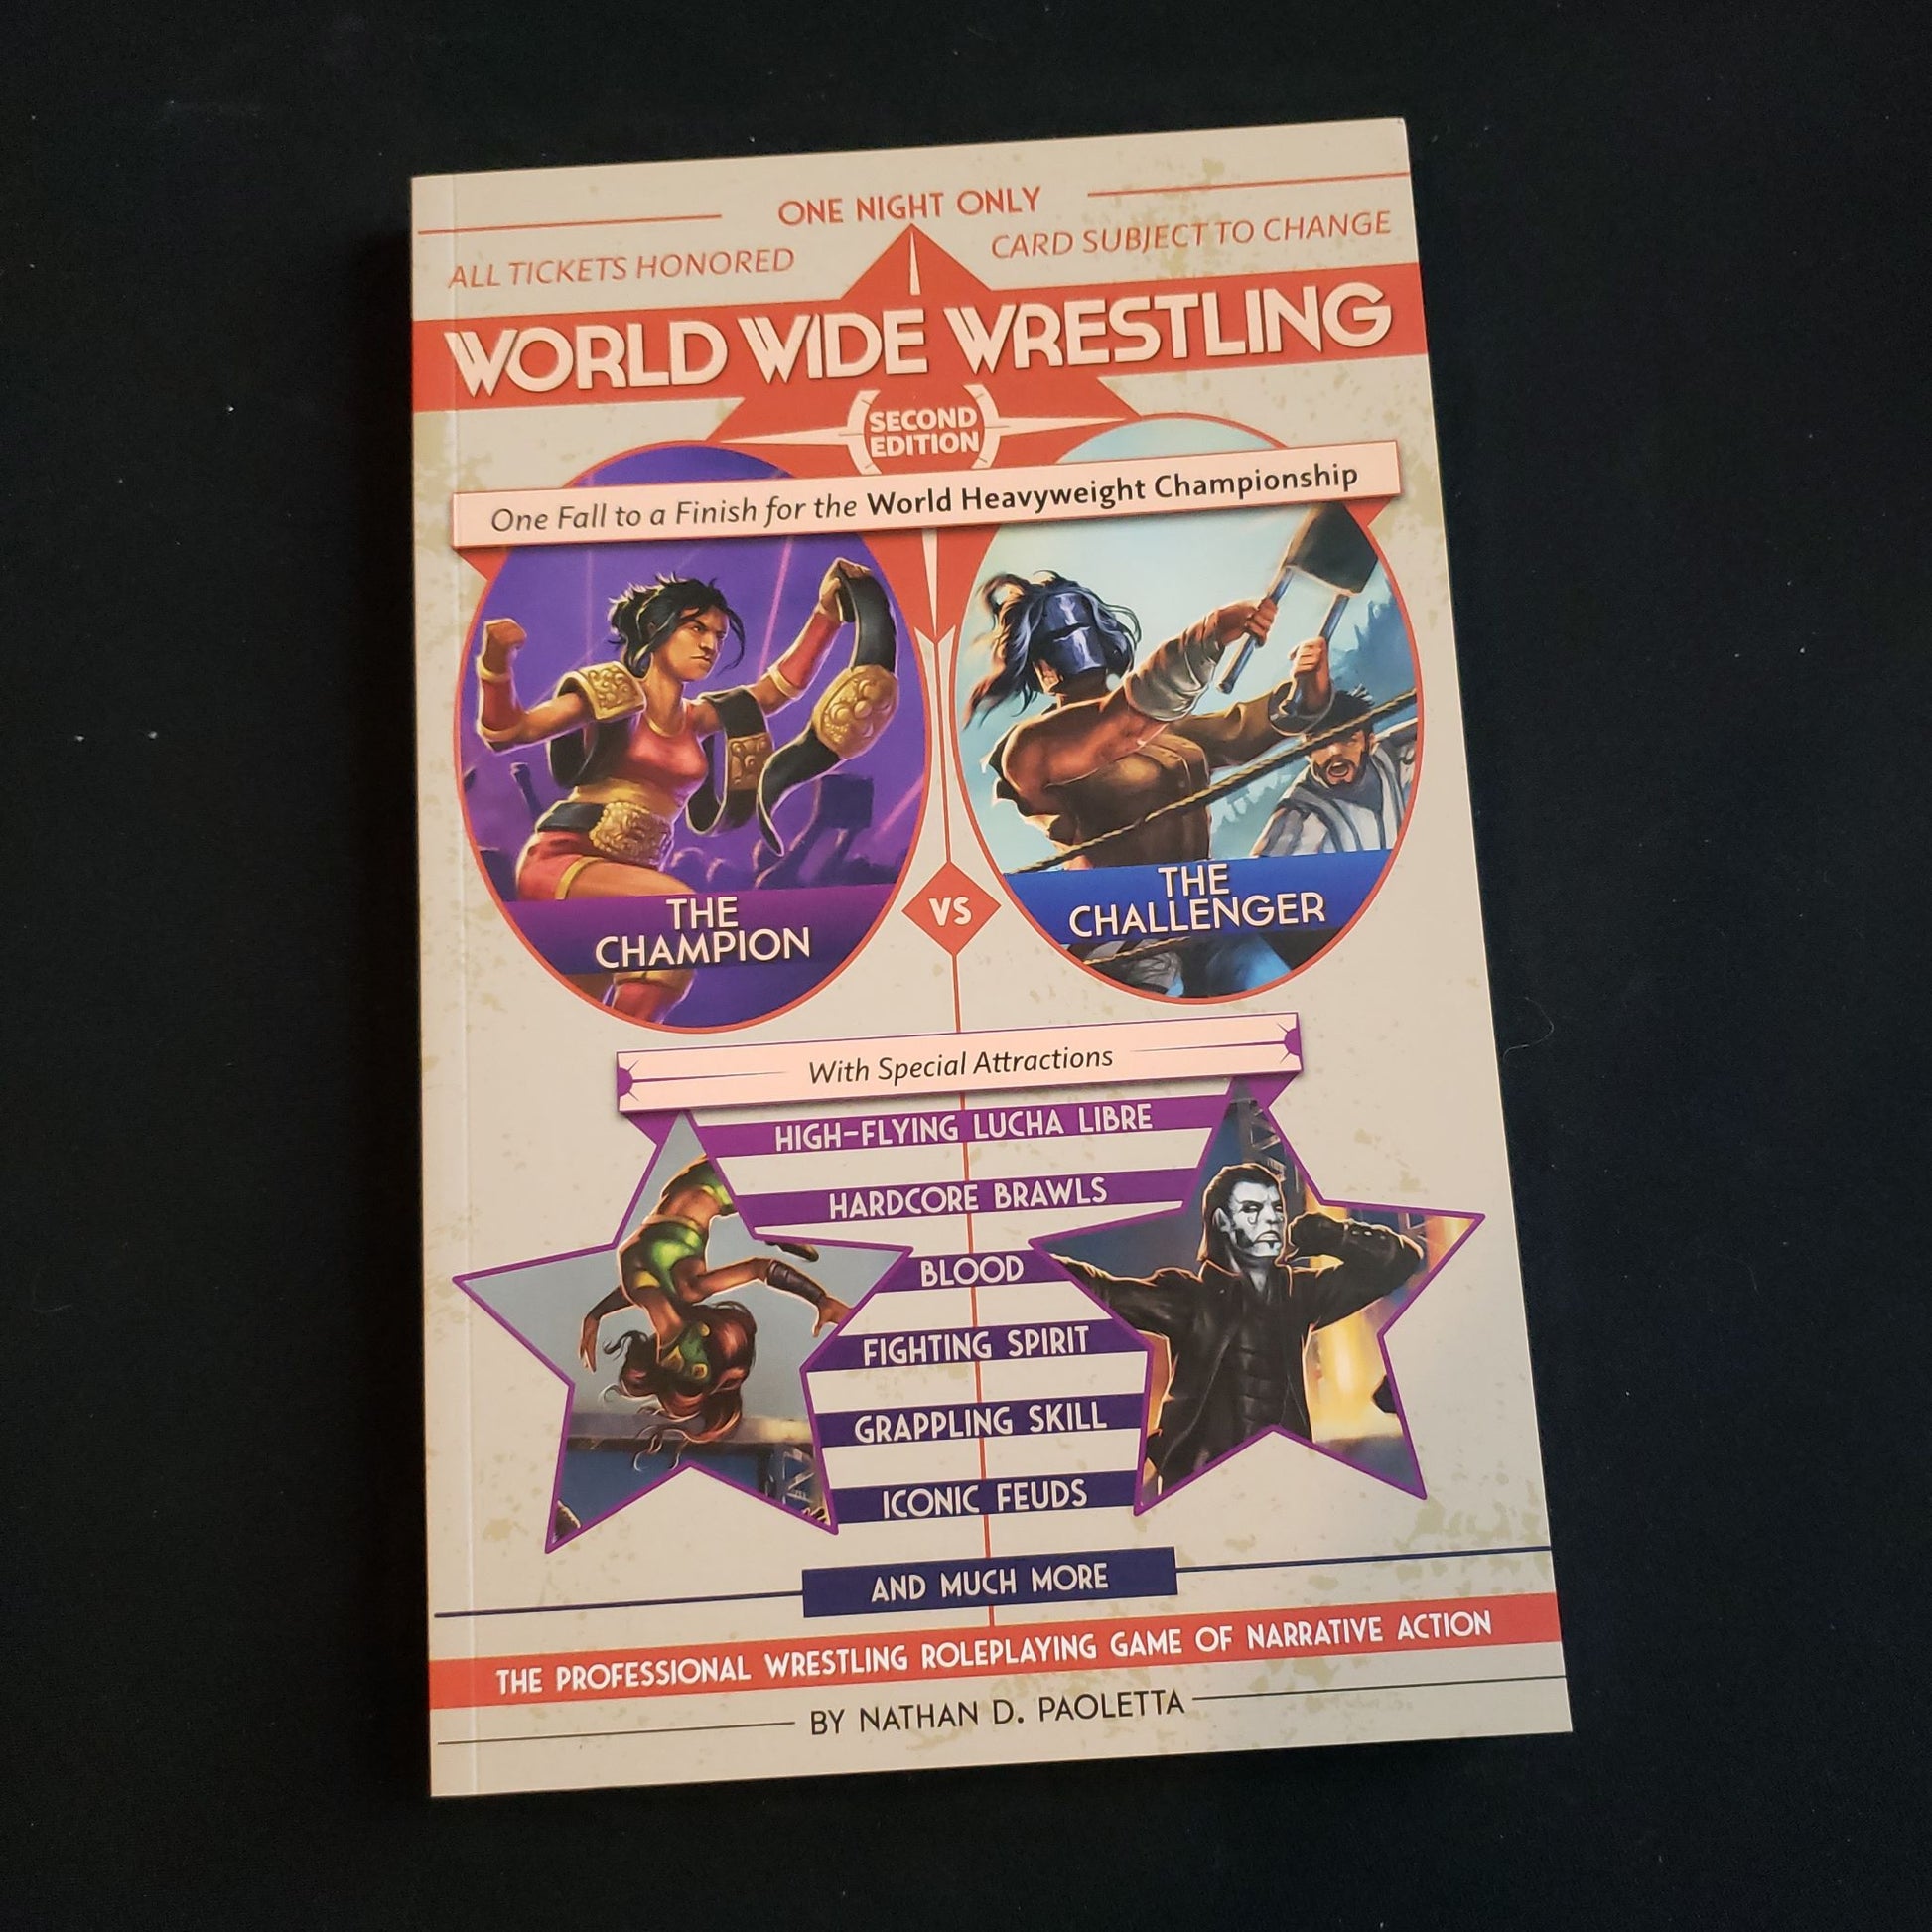 Image shows the front cover of the second edition World Wide Wrestling roleplaying game book